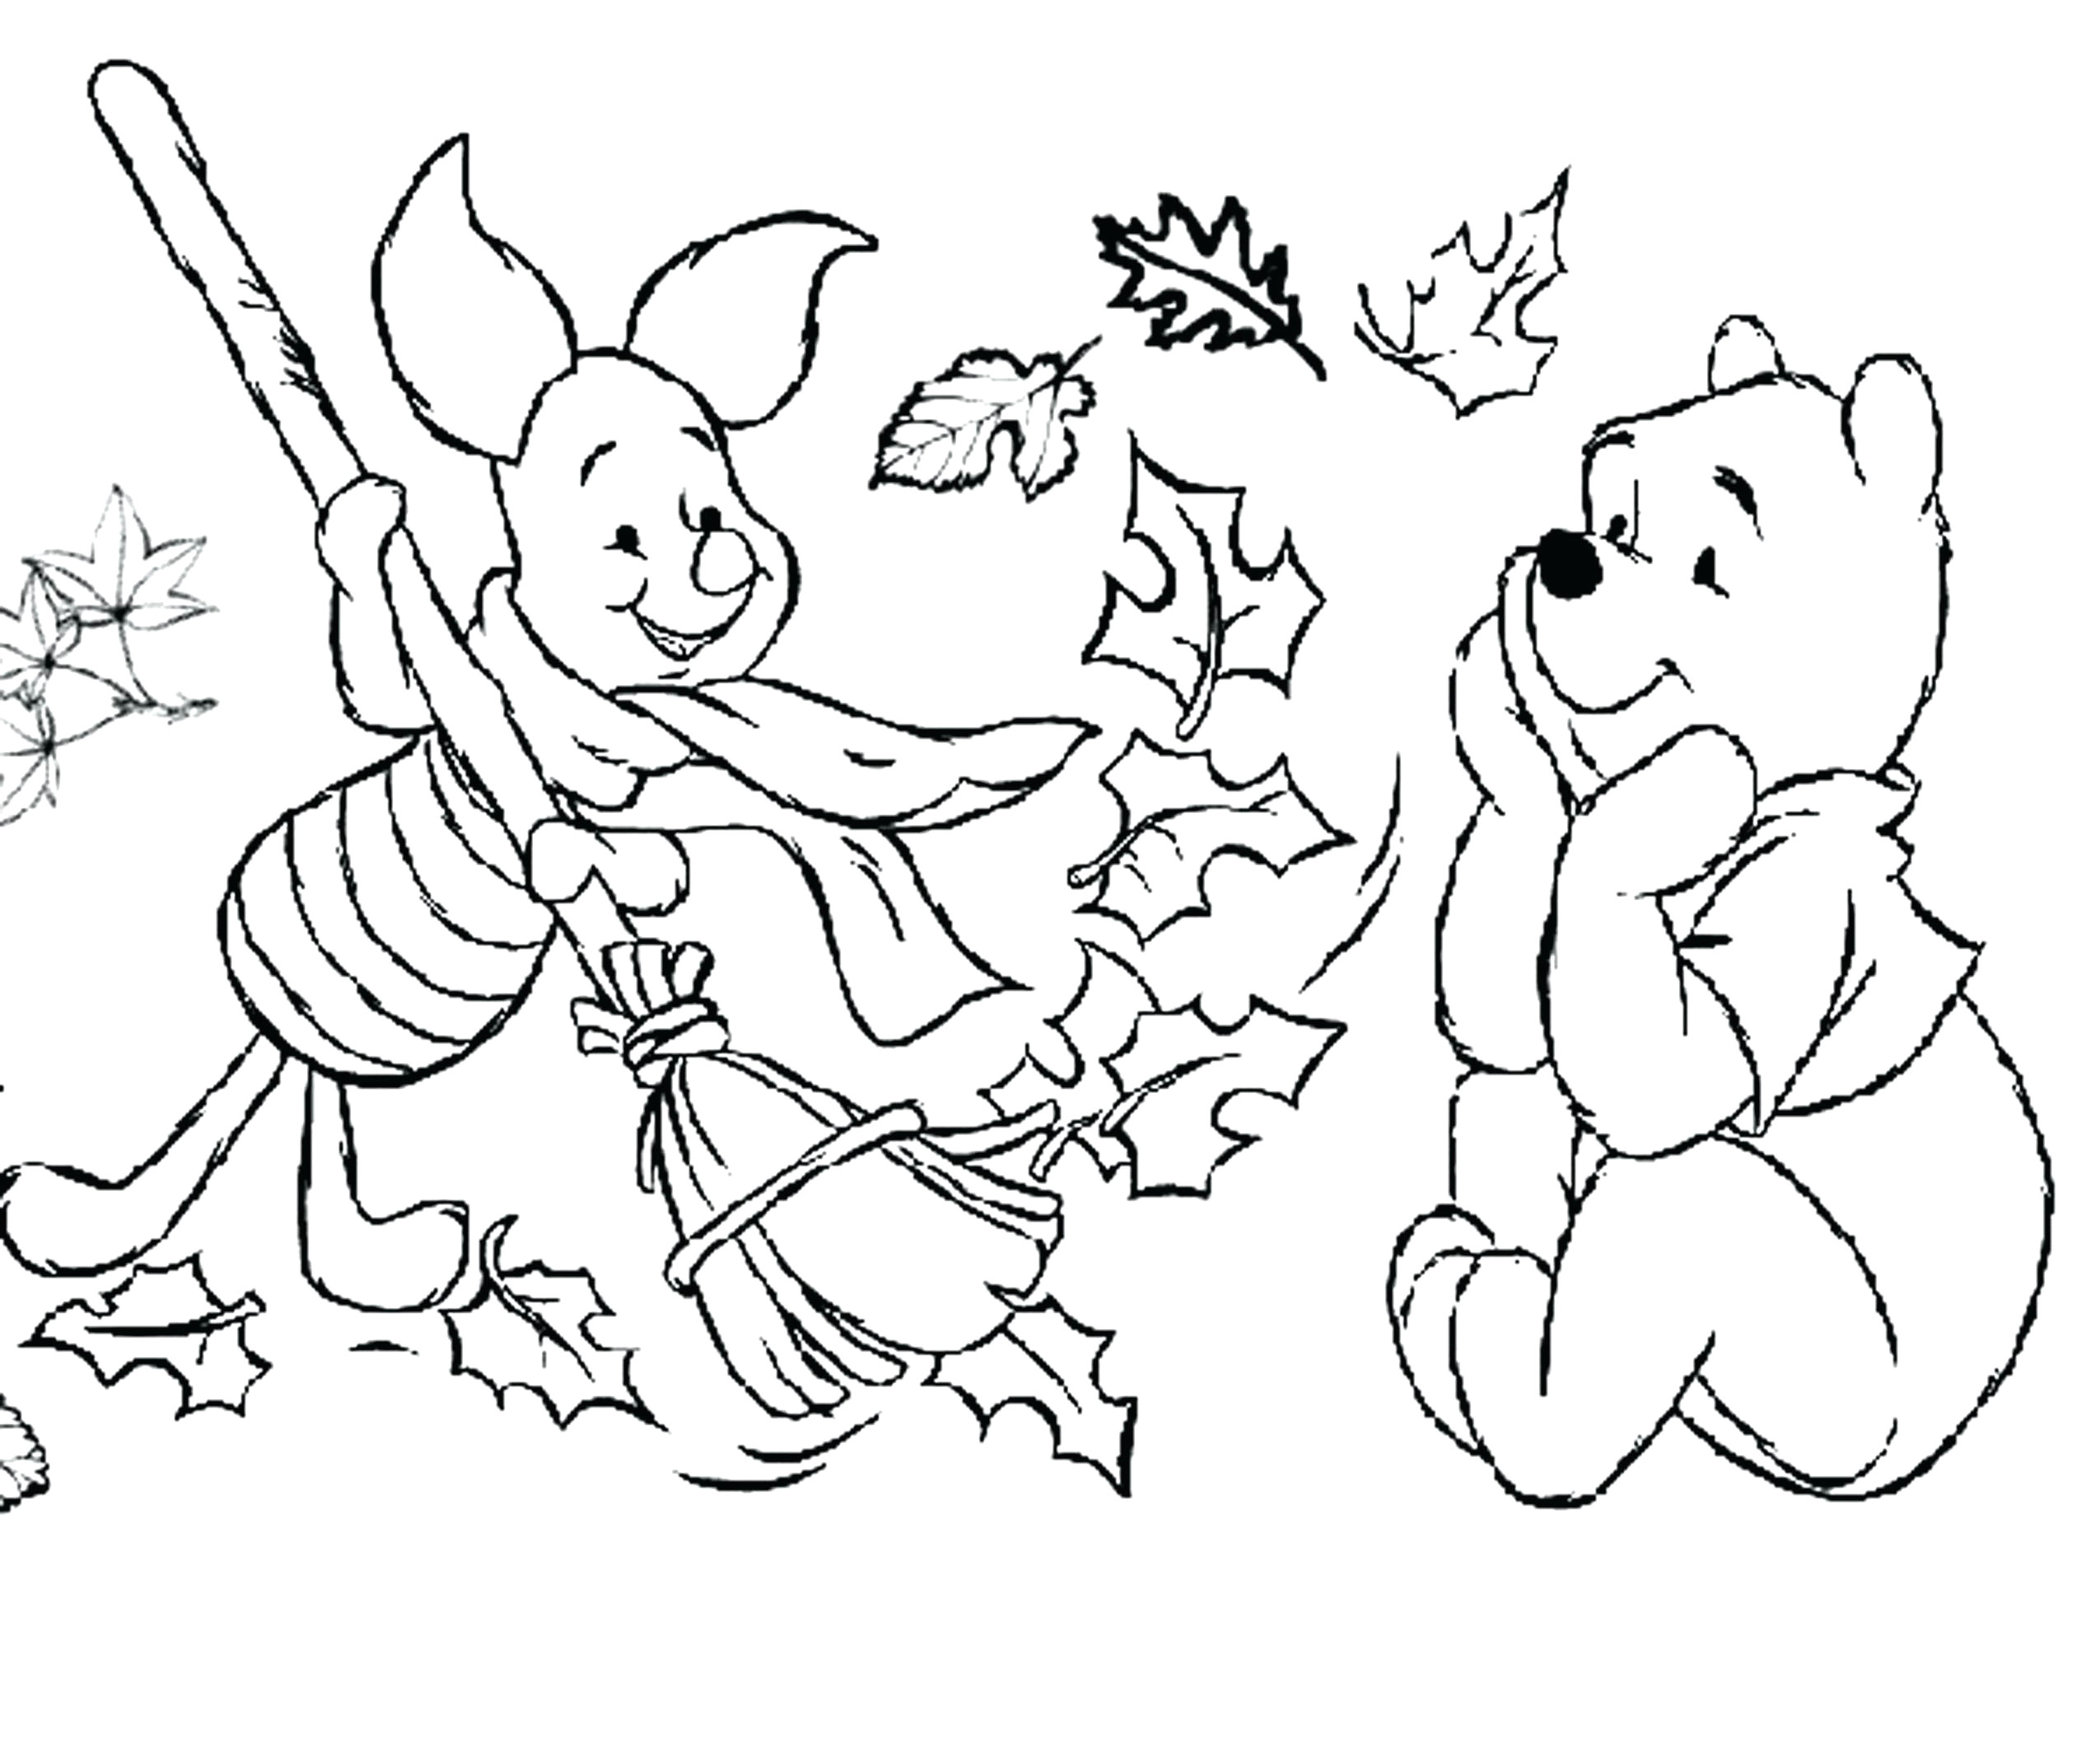 easy to draw instruments more autumn theme coloring pages with musical instruments for kids of easy